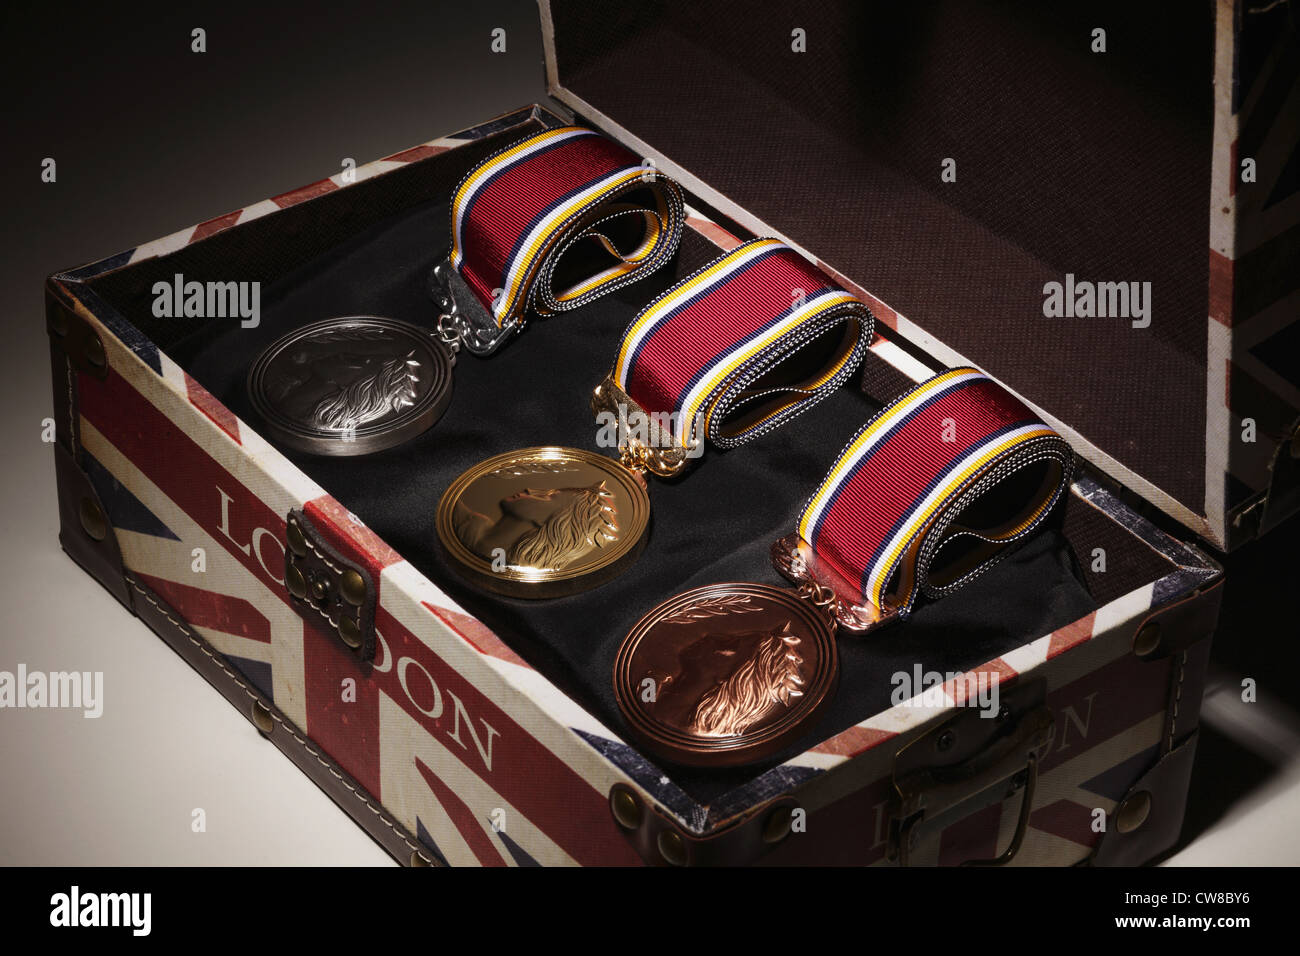 Close Up Of Medals And Briefcase Stock Photo